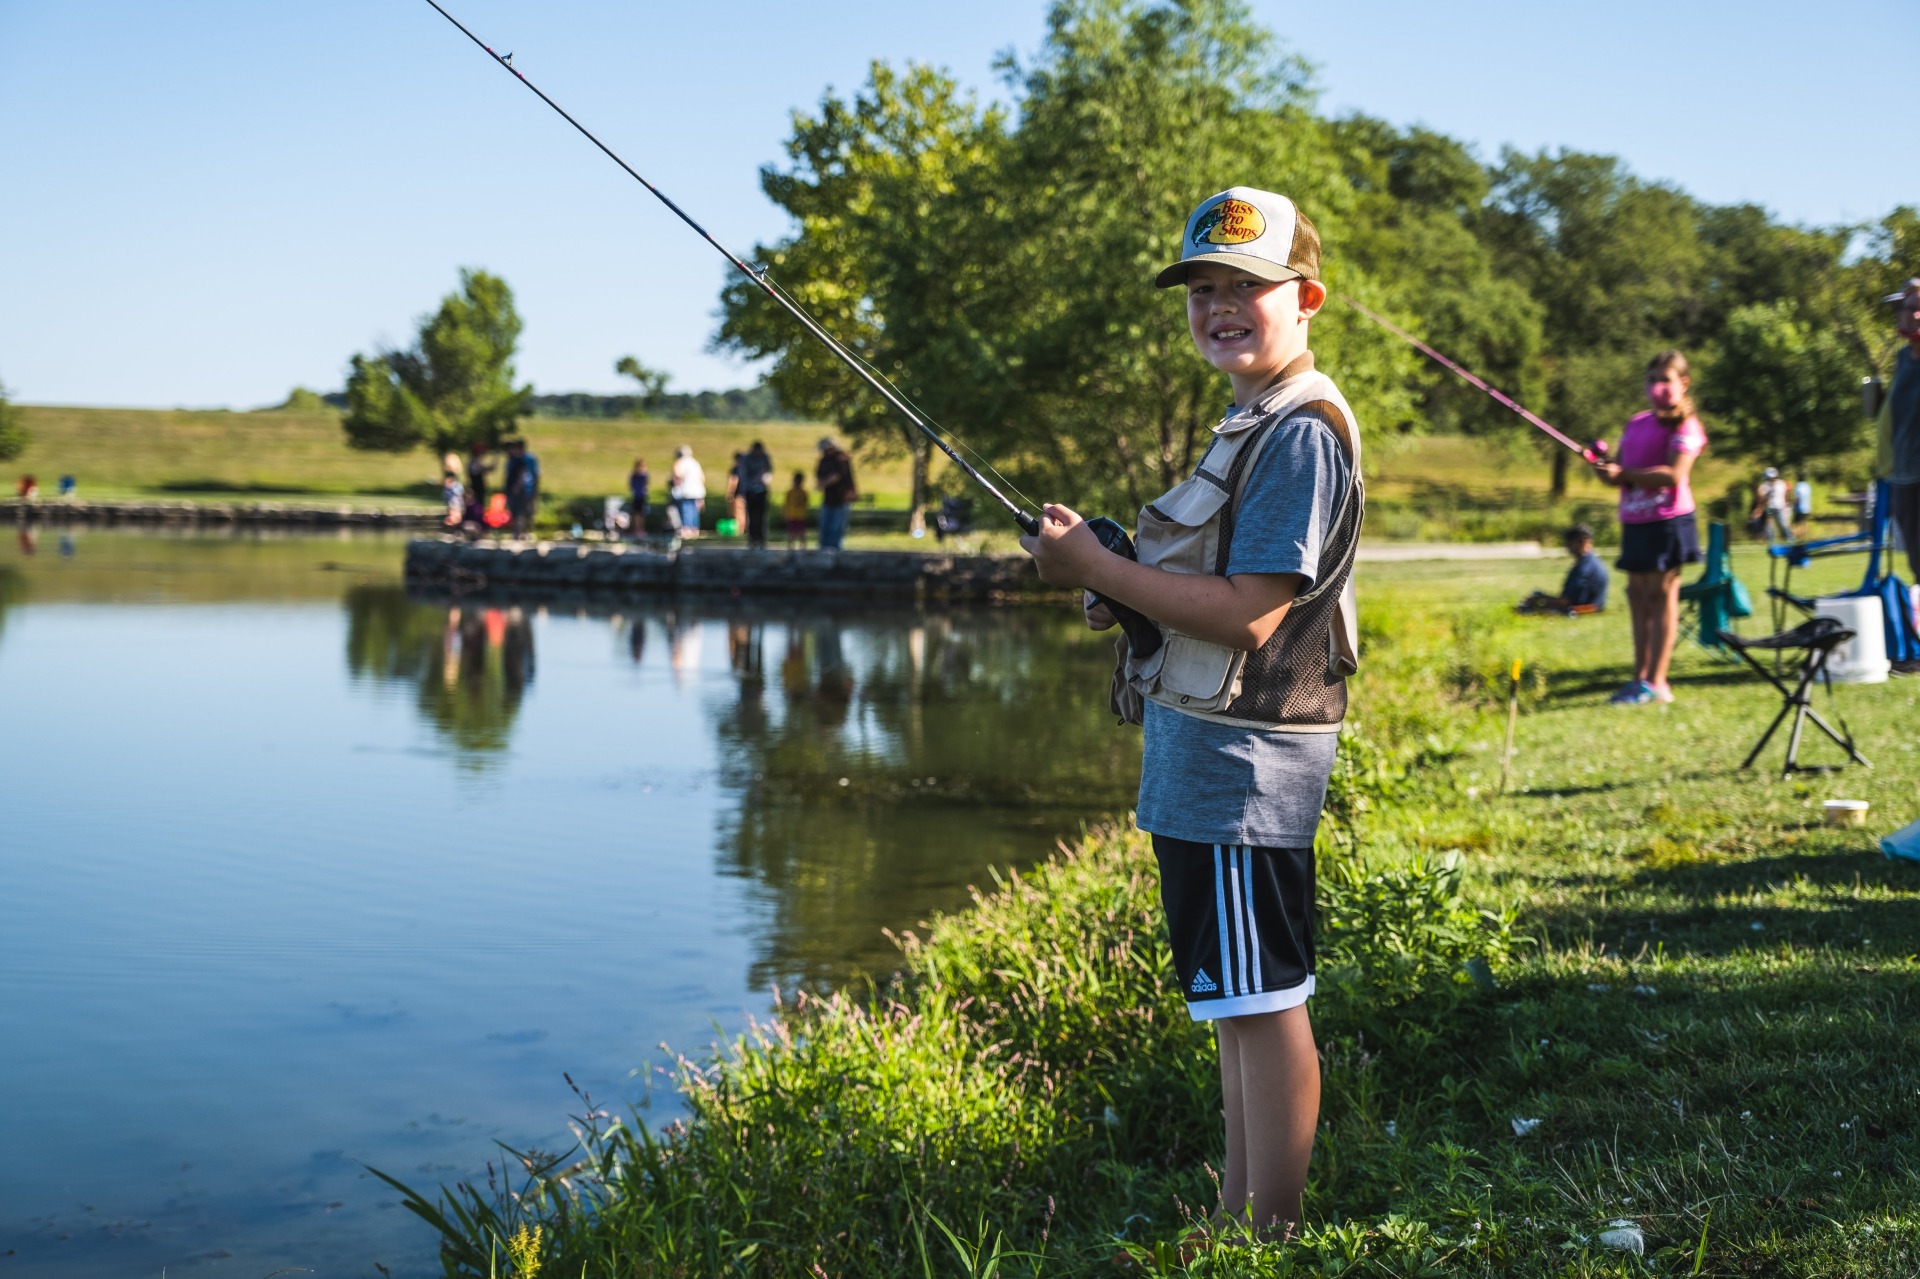 Youth Fishing Derby - August 6 - Council Bluffs, Iowa